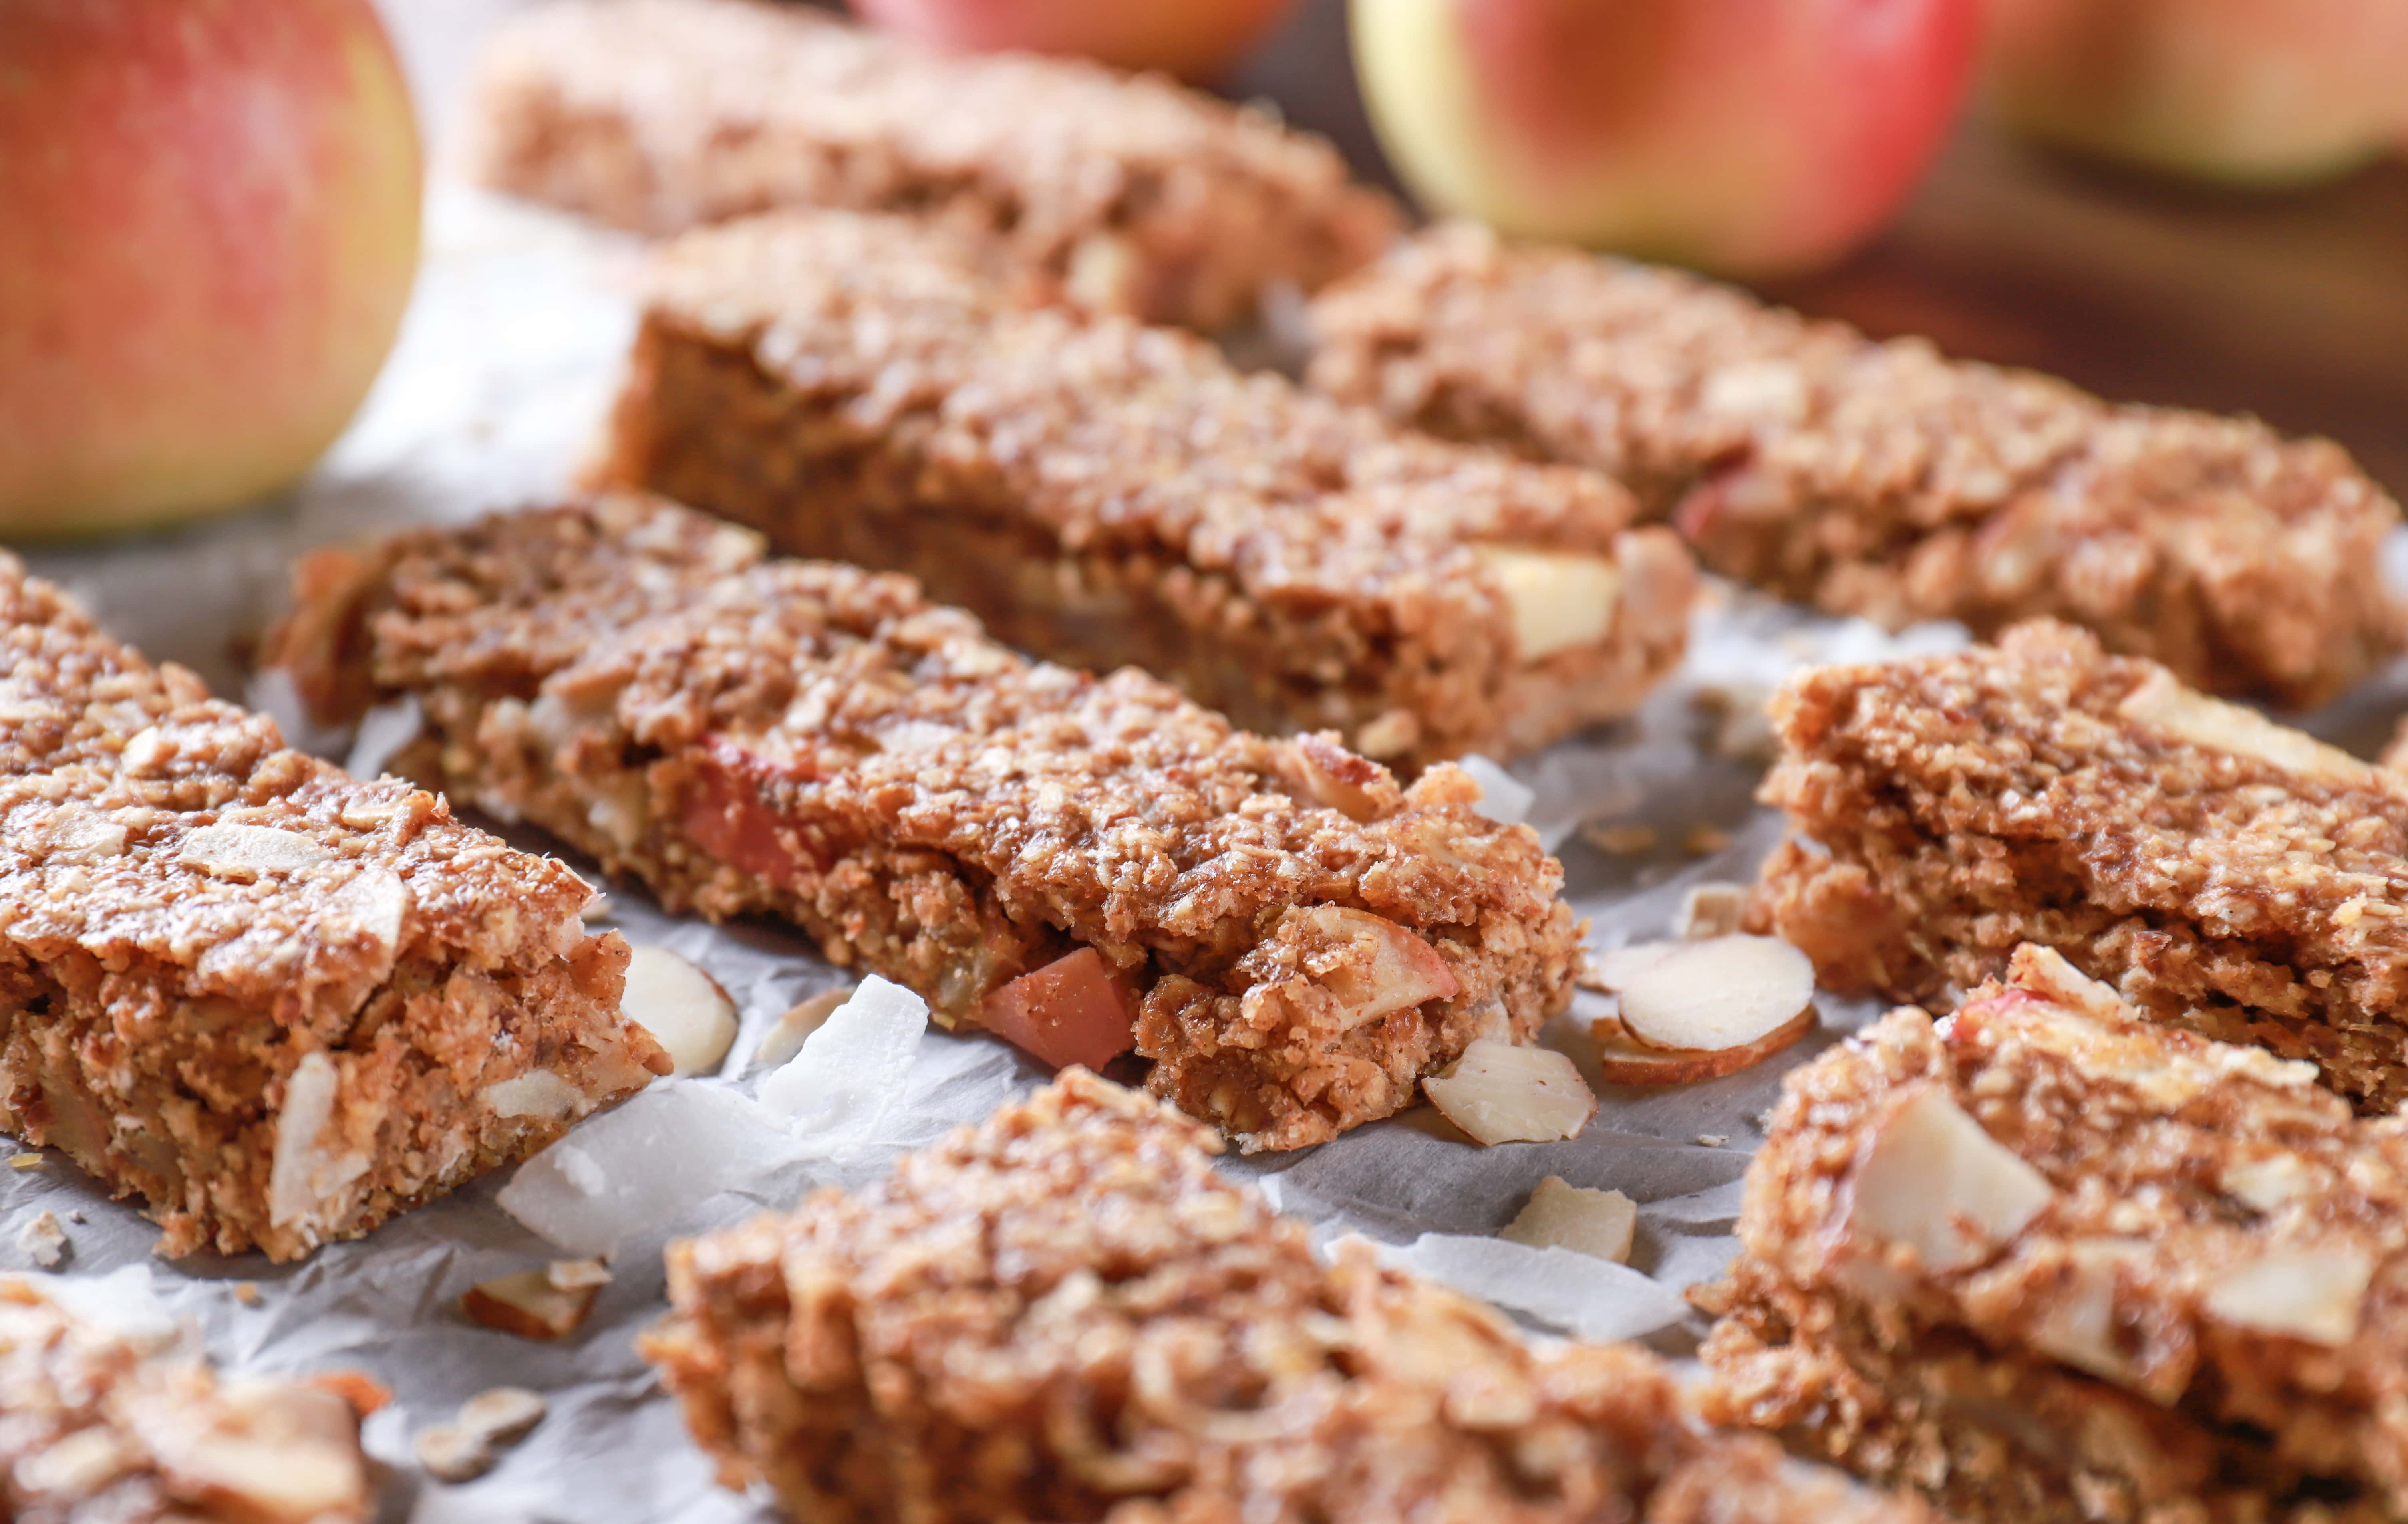 Up close view of a soft baked healthy apple almond granola bar. Recipe from A Kitchen Addiction